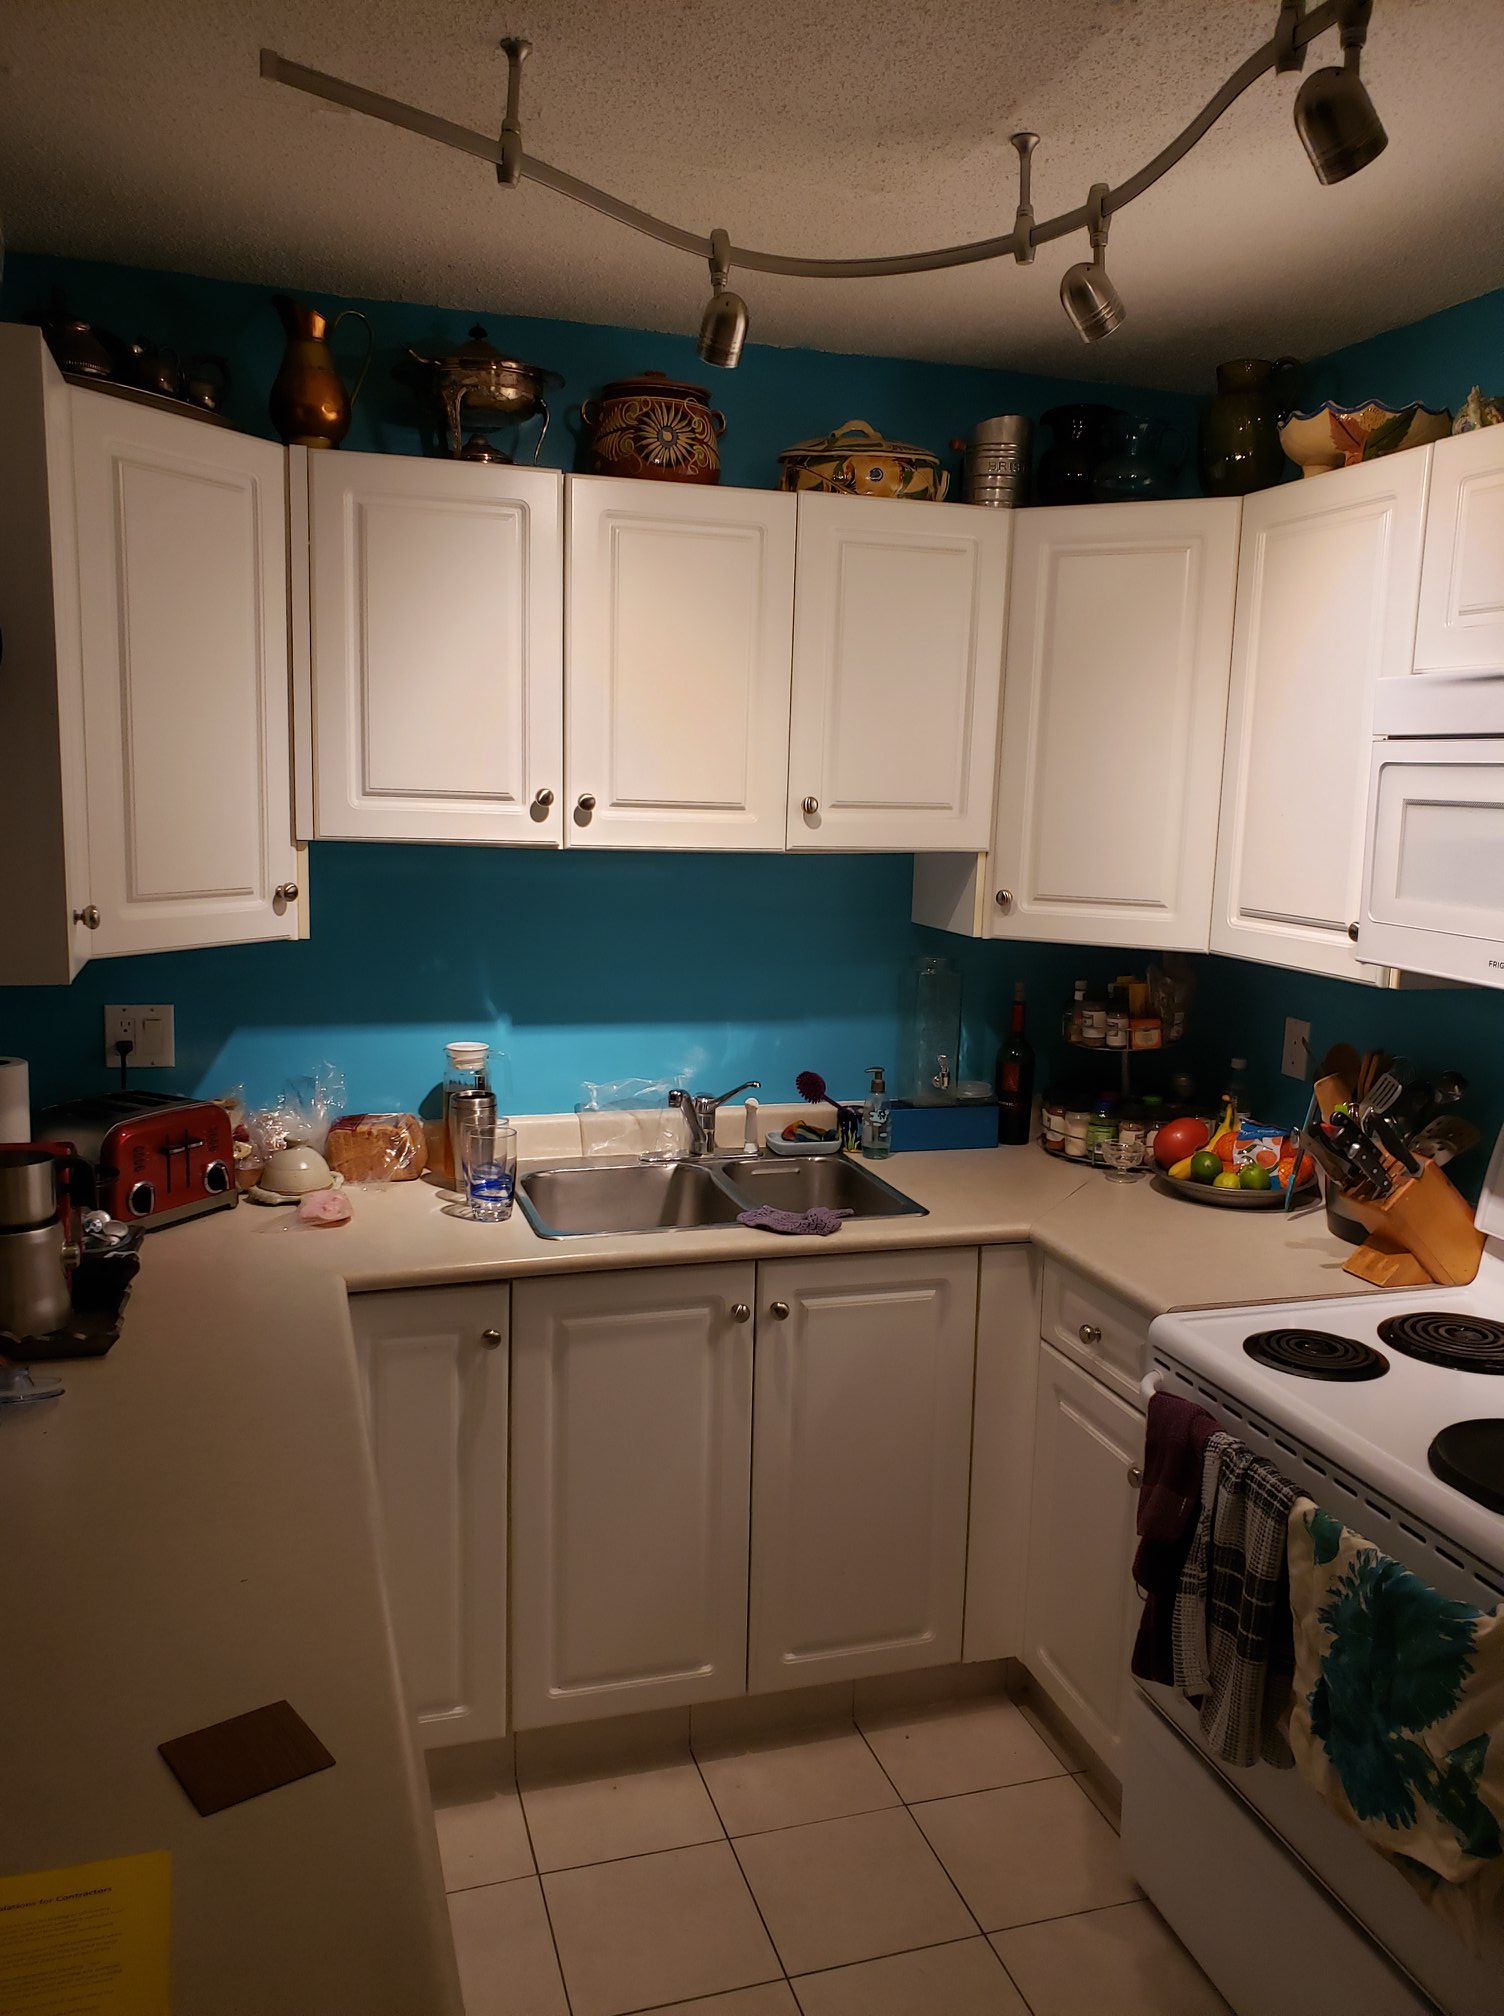 Before and after of modern kitchen renovation with cabinets, countertops and fixtures.